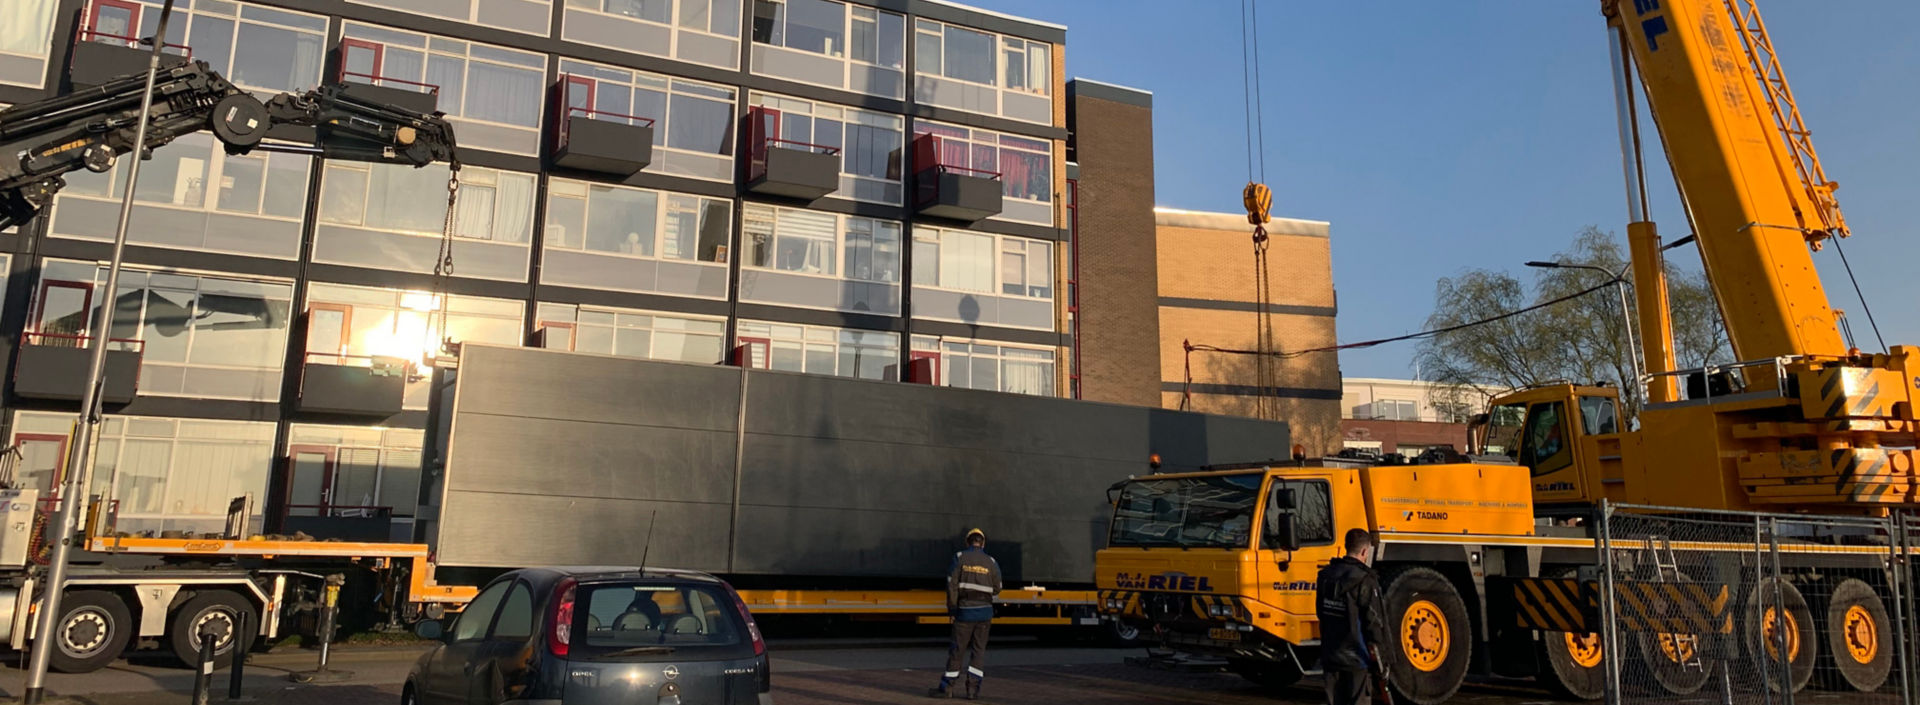 Crane getting ready to lift a prefabricated elevator from a truck in front of a residential building.